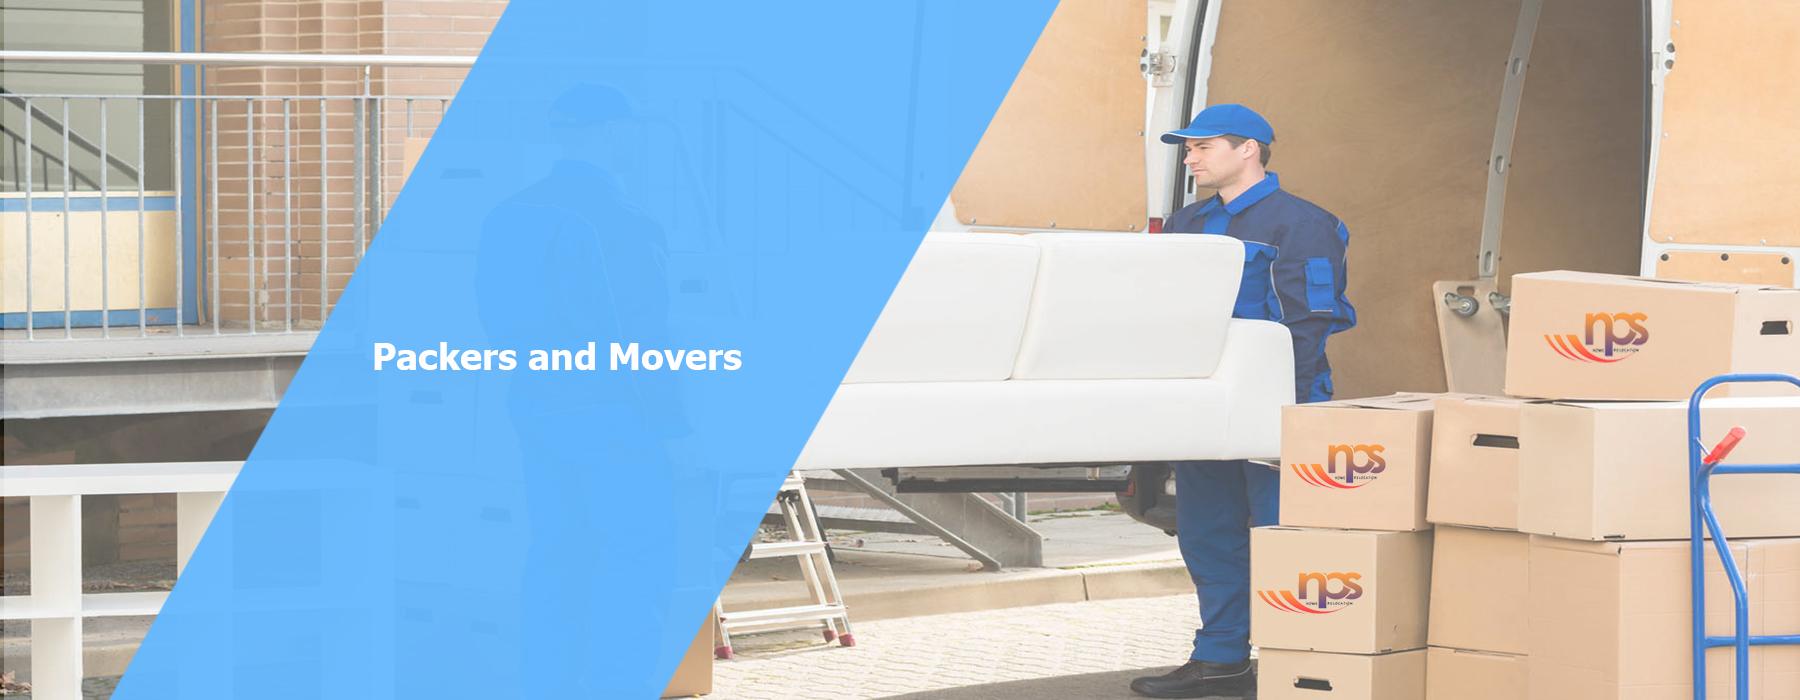 Packers and Movers in Noida Sector 45